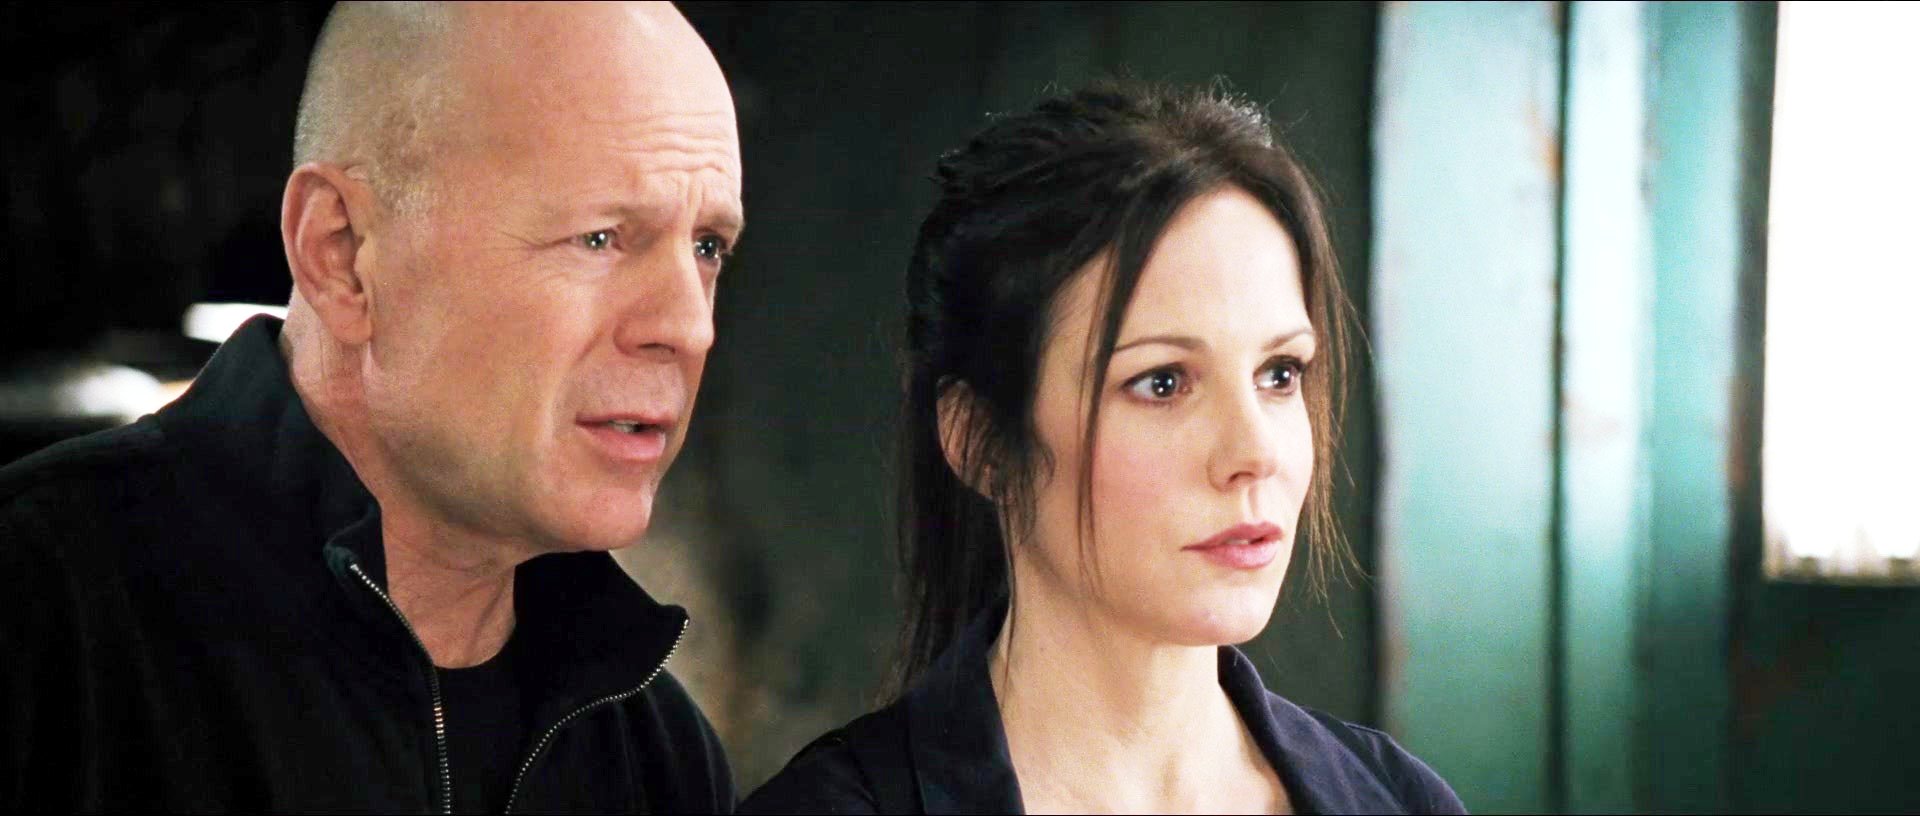  Bruce Willis stars as Frank Moses and Mary-Louise Parker stars as Sarah in Summit Entertainment's &quot;Red&quot;.